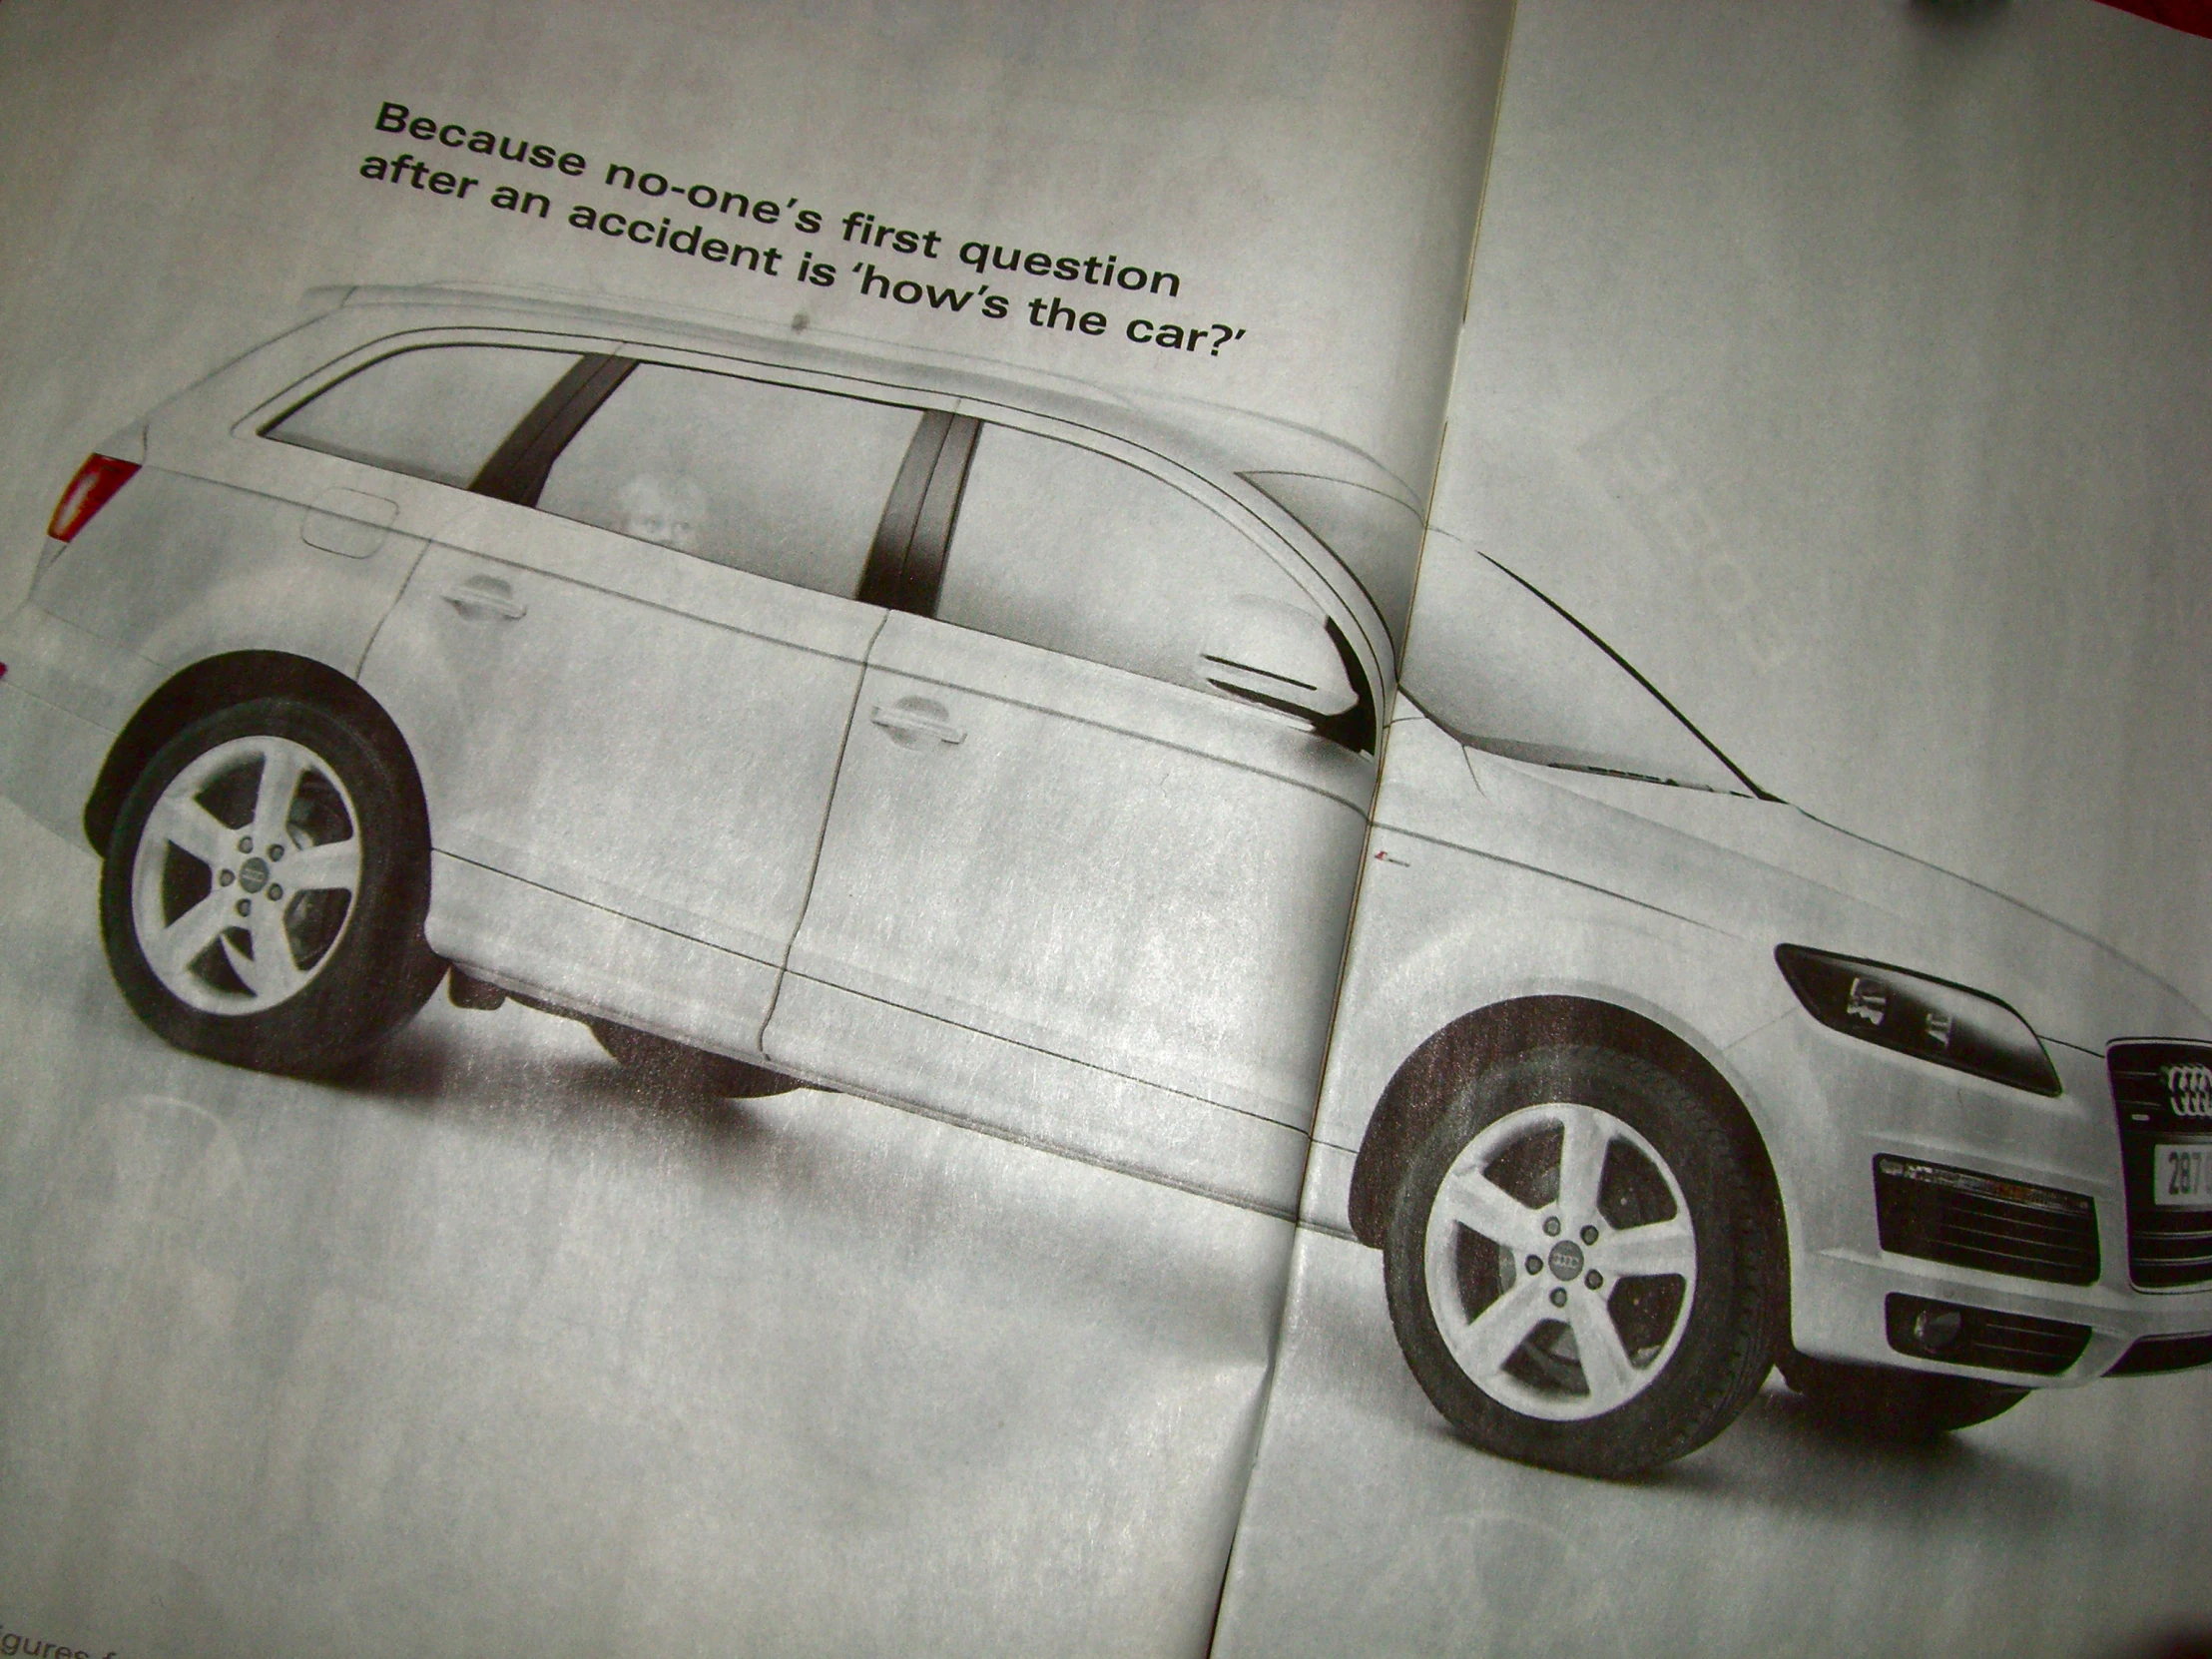 a magazine showing a car in front of a clock